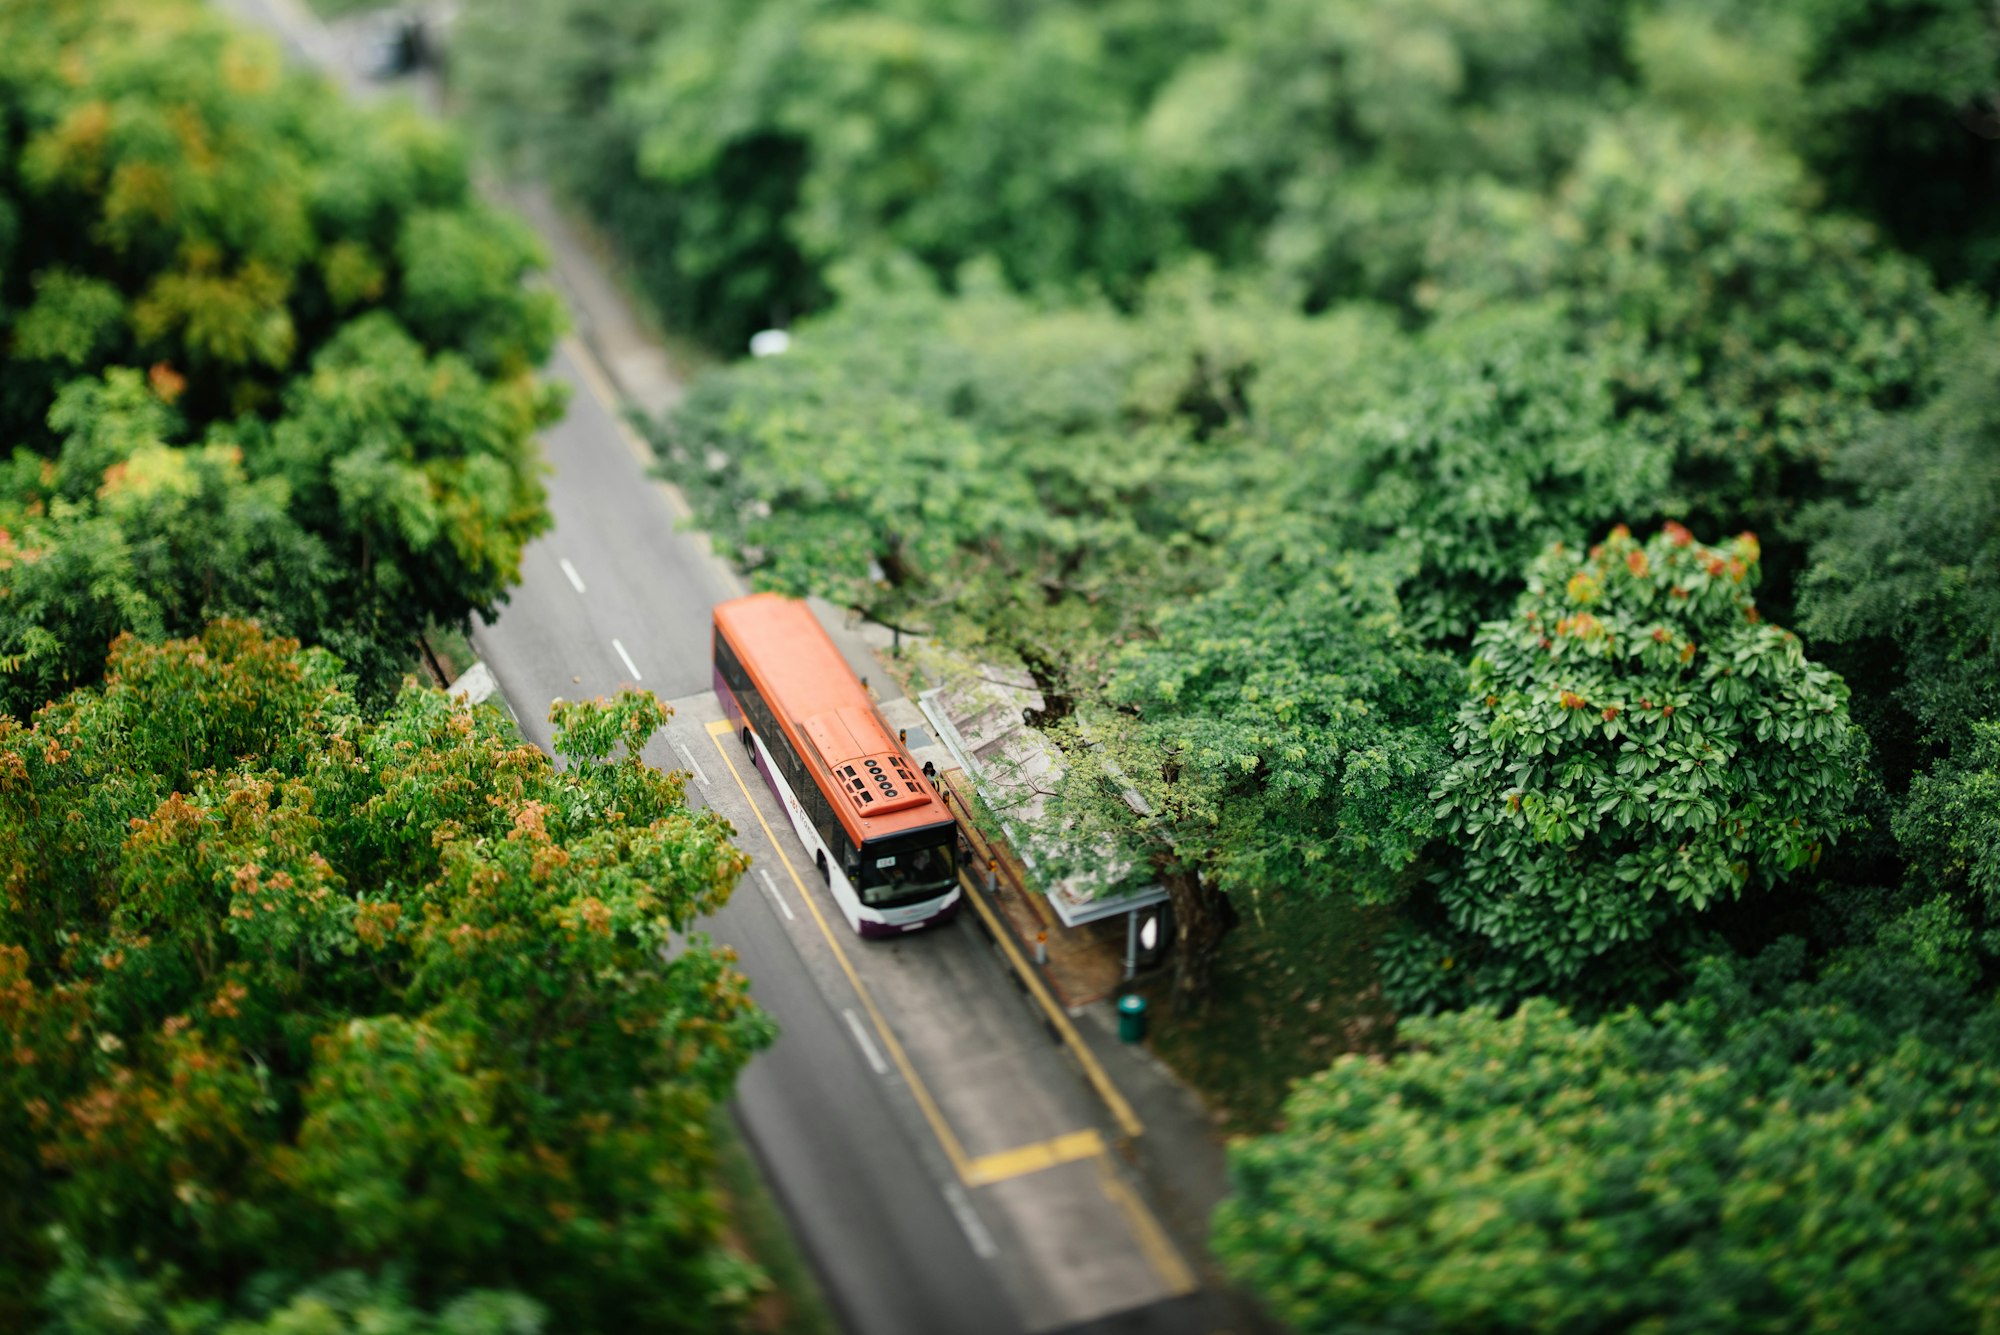 Bus at a stop from above